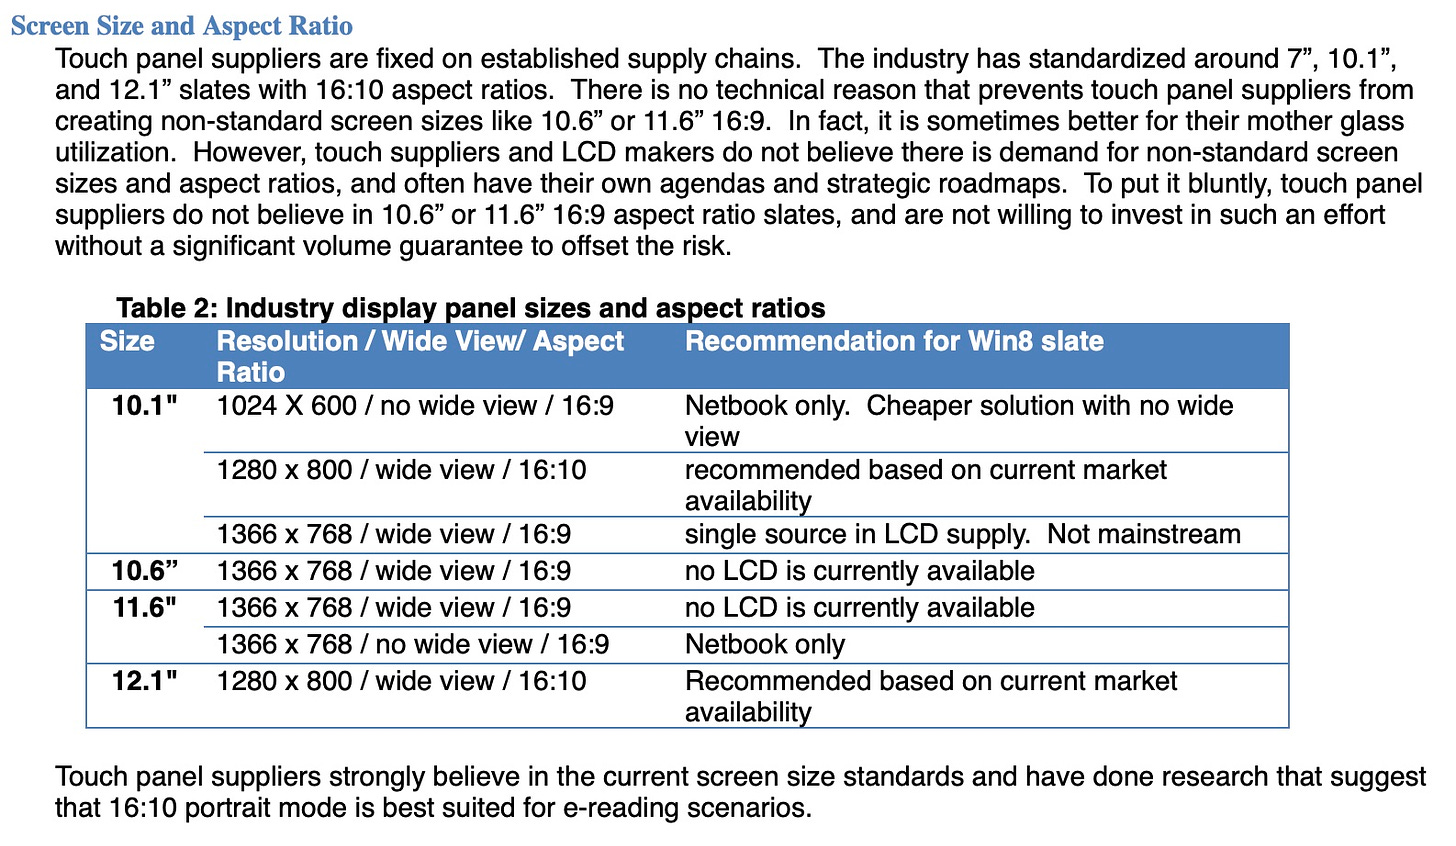 Touch panel suppliers are fixed on established supply chains. The industry has standardized around 7", 10.1", and 12.1" slates with 16:10 aspect ratios. There is no technical reason that prevents touch panel suppliers from creating non-standard screen sizes like 10.6" or 11.6" 16:9. In fact, it is sometimes better for their mother glass utilization. However, touch suppliers and LCD makers do not believe there is demand for non-standard screen sizes and aspect ratios, and often have their own agendas and strategic roadmaps. To put it bluntly, touch panel suppliers do not believe in 10.6" or 11.6" 16:9 aspect ratio slates, and are not willing to invest in such an effort without a significant volume guarantee to offset the risk. Table 2: Industry display panel sizes and aspect ratios Size Resolution / Wide View/ Aspect Ratio Recommendation for Win8 slate 10.1" 1024 X 600 / no wide view / 16:9 Netbook onlv. Cheaper solution with no wide 1280 × 800 / wide view / 16:10 10.6" 11.6" 12.1" 1366 × 768 / wide view / 16:9 1366 × 768 / wide view / 16.9 1366 × 768 / wide view / 16:9 1366 × 768 / no wide view / 16:9 1280 x 800 / wide view / 16:10 view recommended based on current market availability single source in LCD supply. Not mainstream no LCD is currently available no LCD is currently available Netbook only Recommended based on current market availabilit Touch panel suppliers strongly believe in the current screen size standards and have done research that suggest that 16:10 portrait mode is best suited for e-reading scenarios.